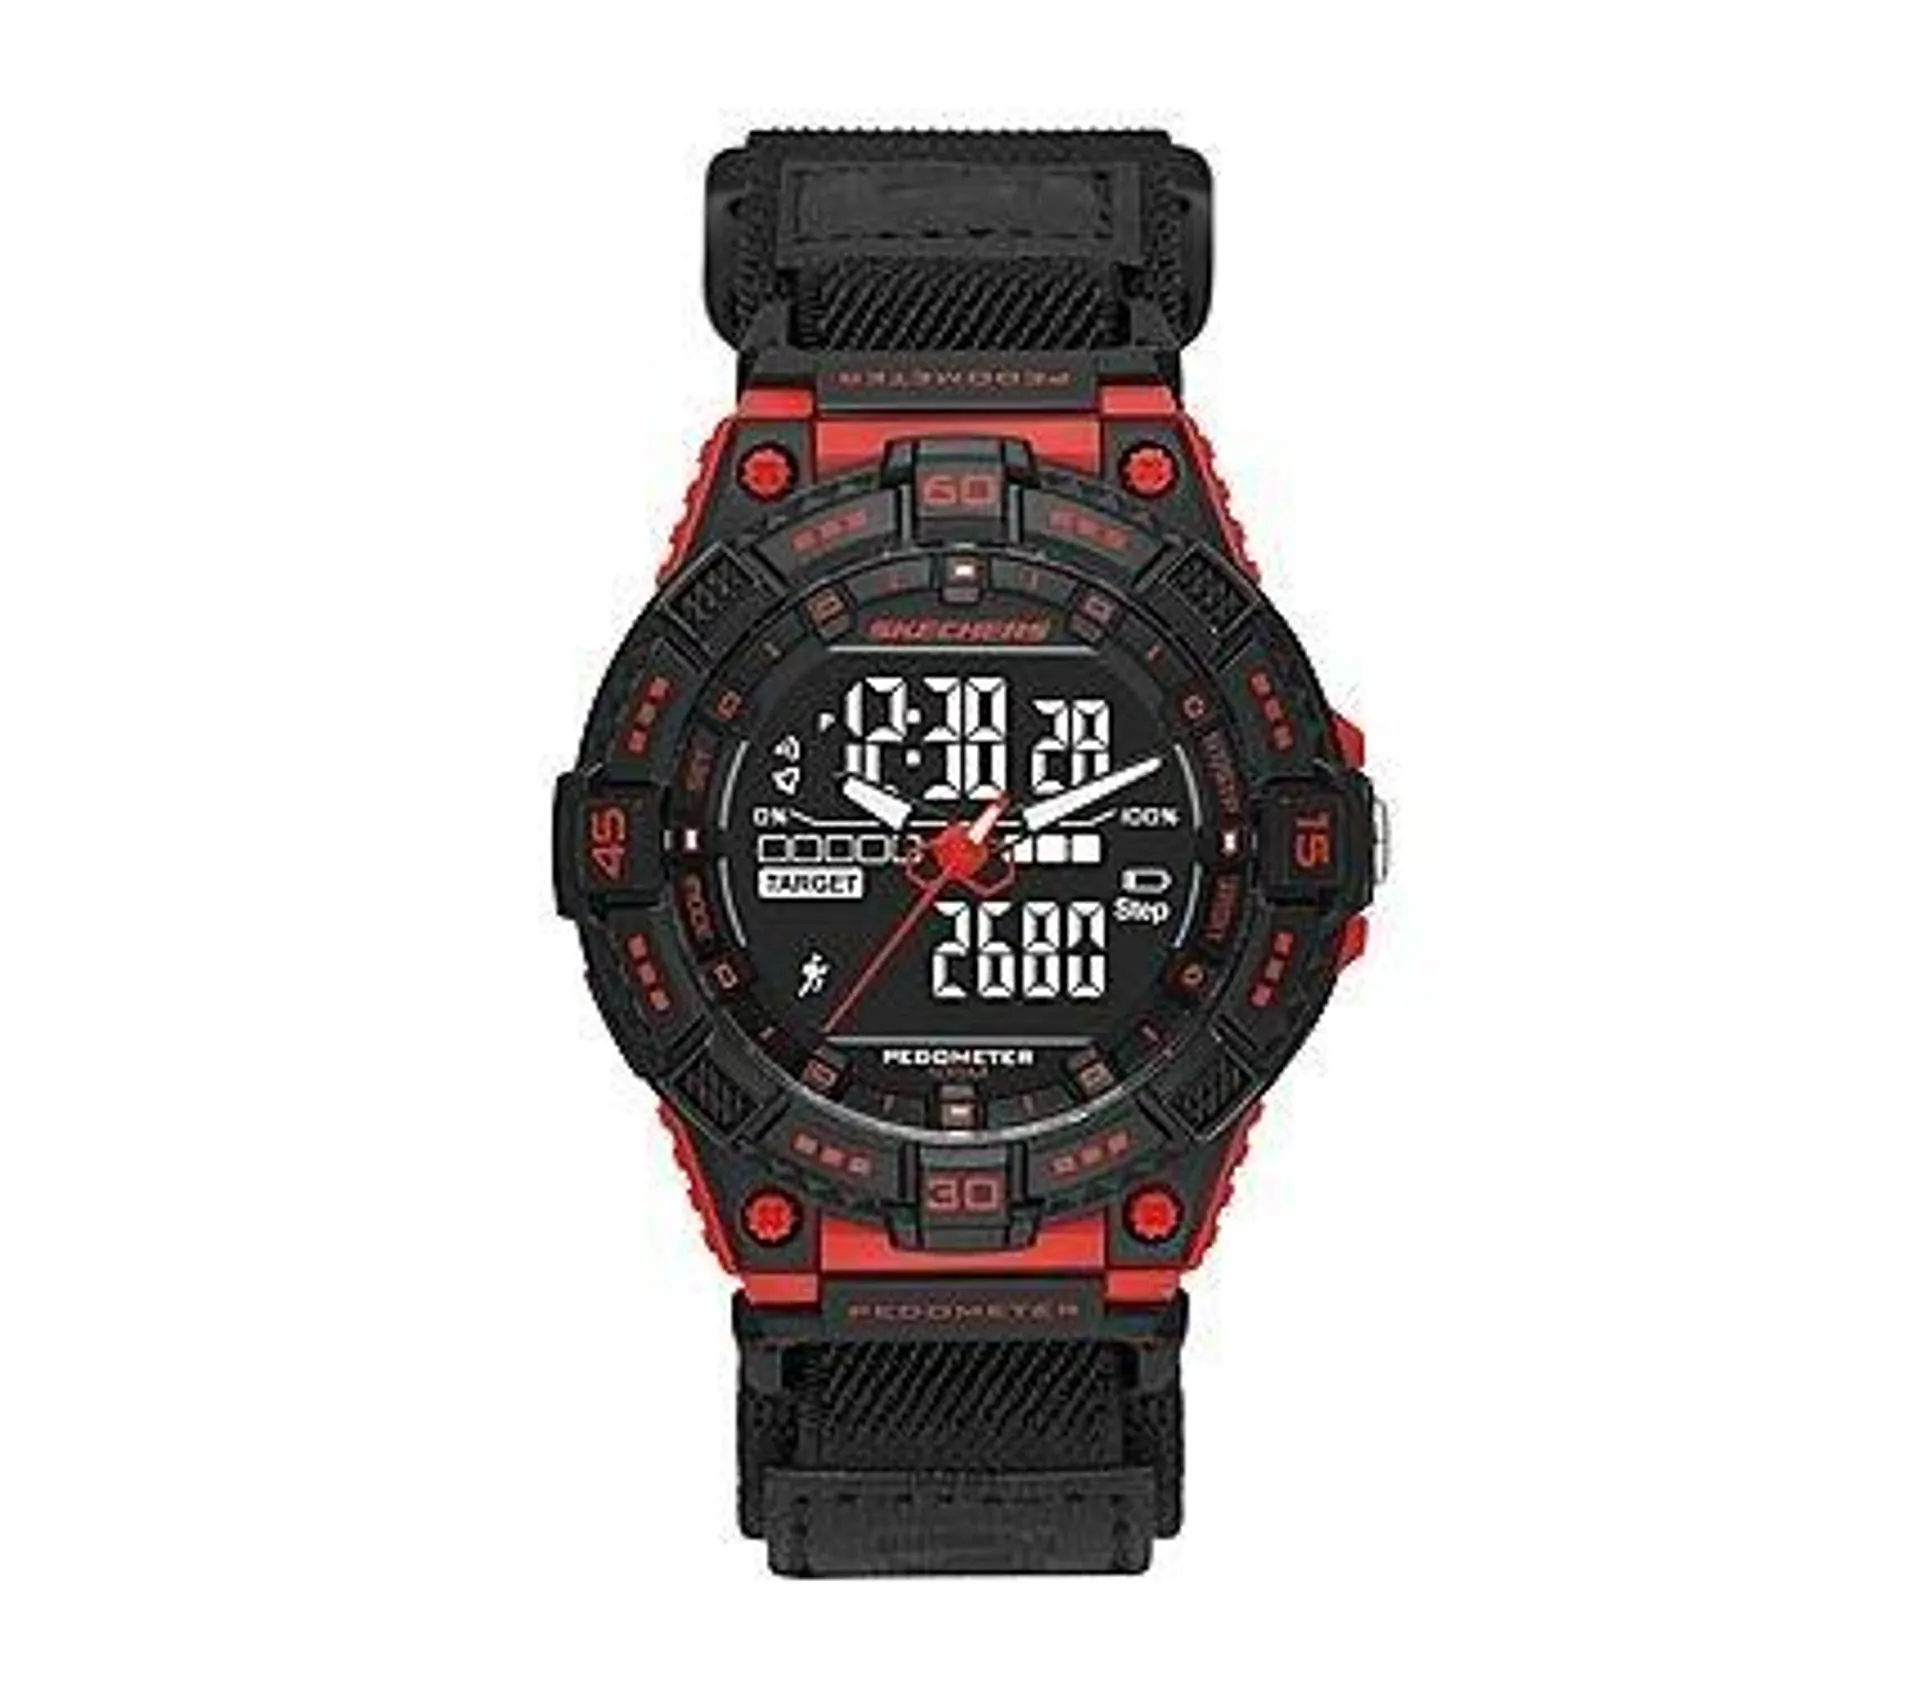 Men's Watches - Downey Fast Wrap Black with Red